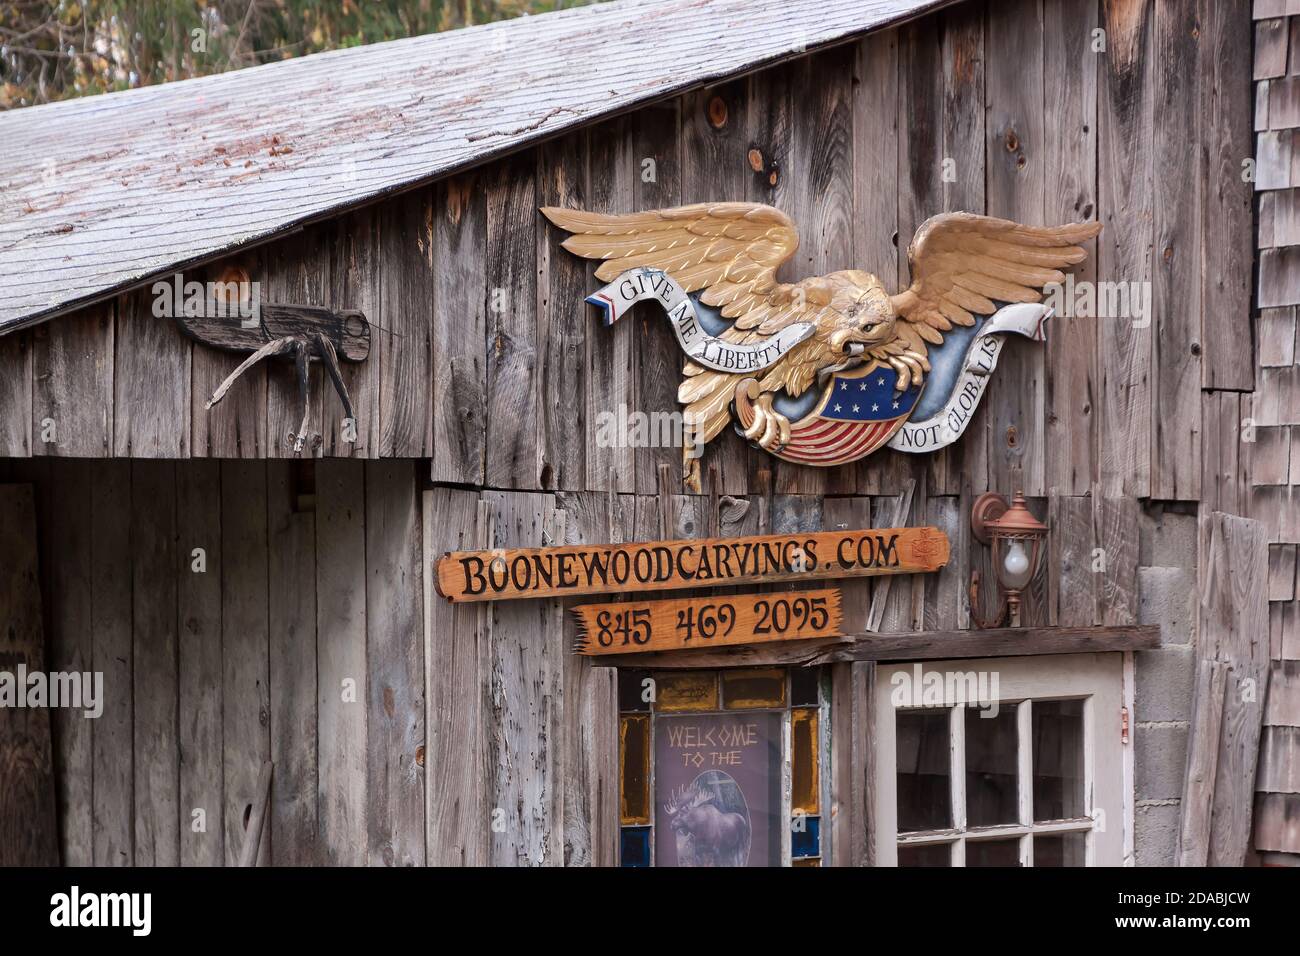 Boone custom wood carving and sign business signage in front of his studio in Sugarloaf Village, Chester, New York, United States. Stock Photo